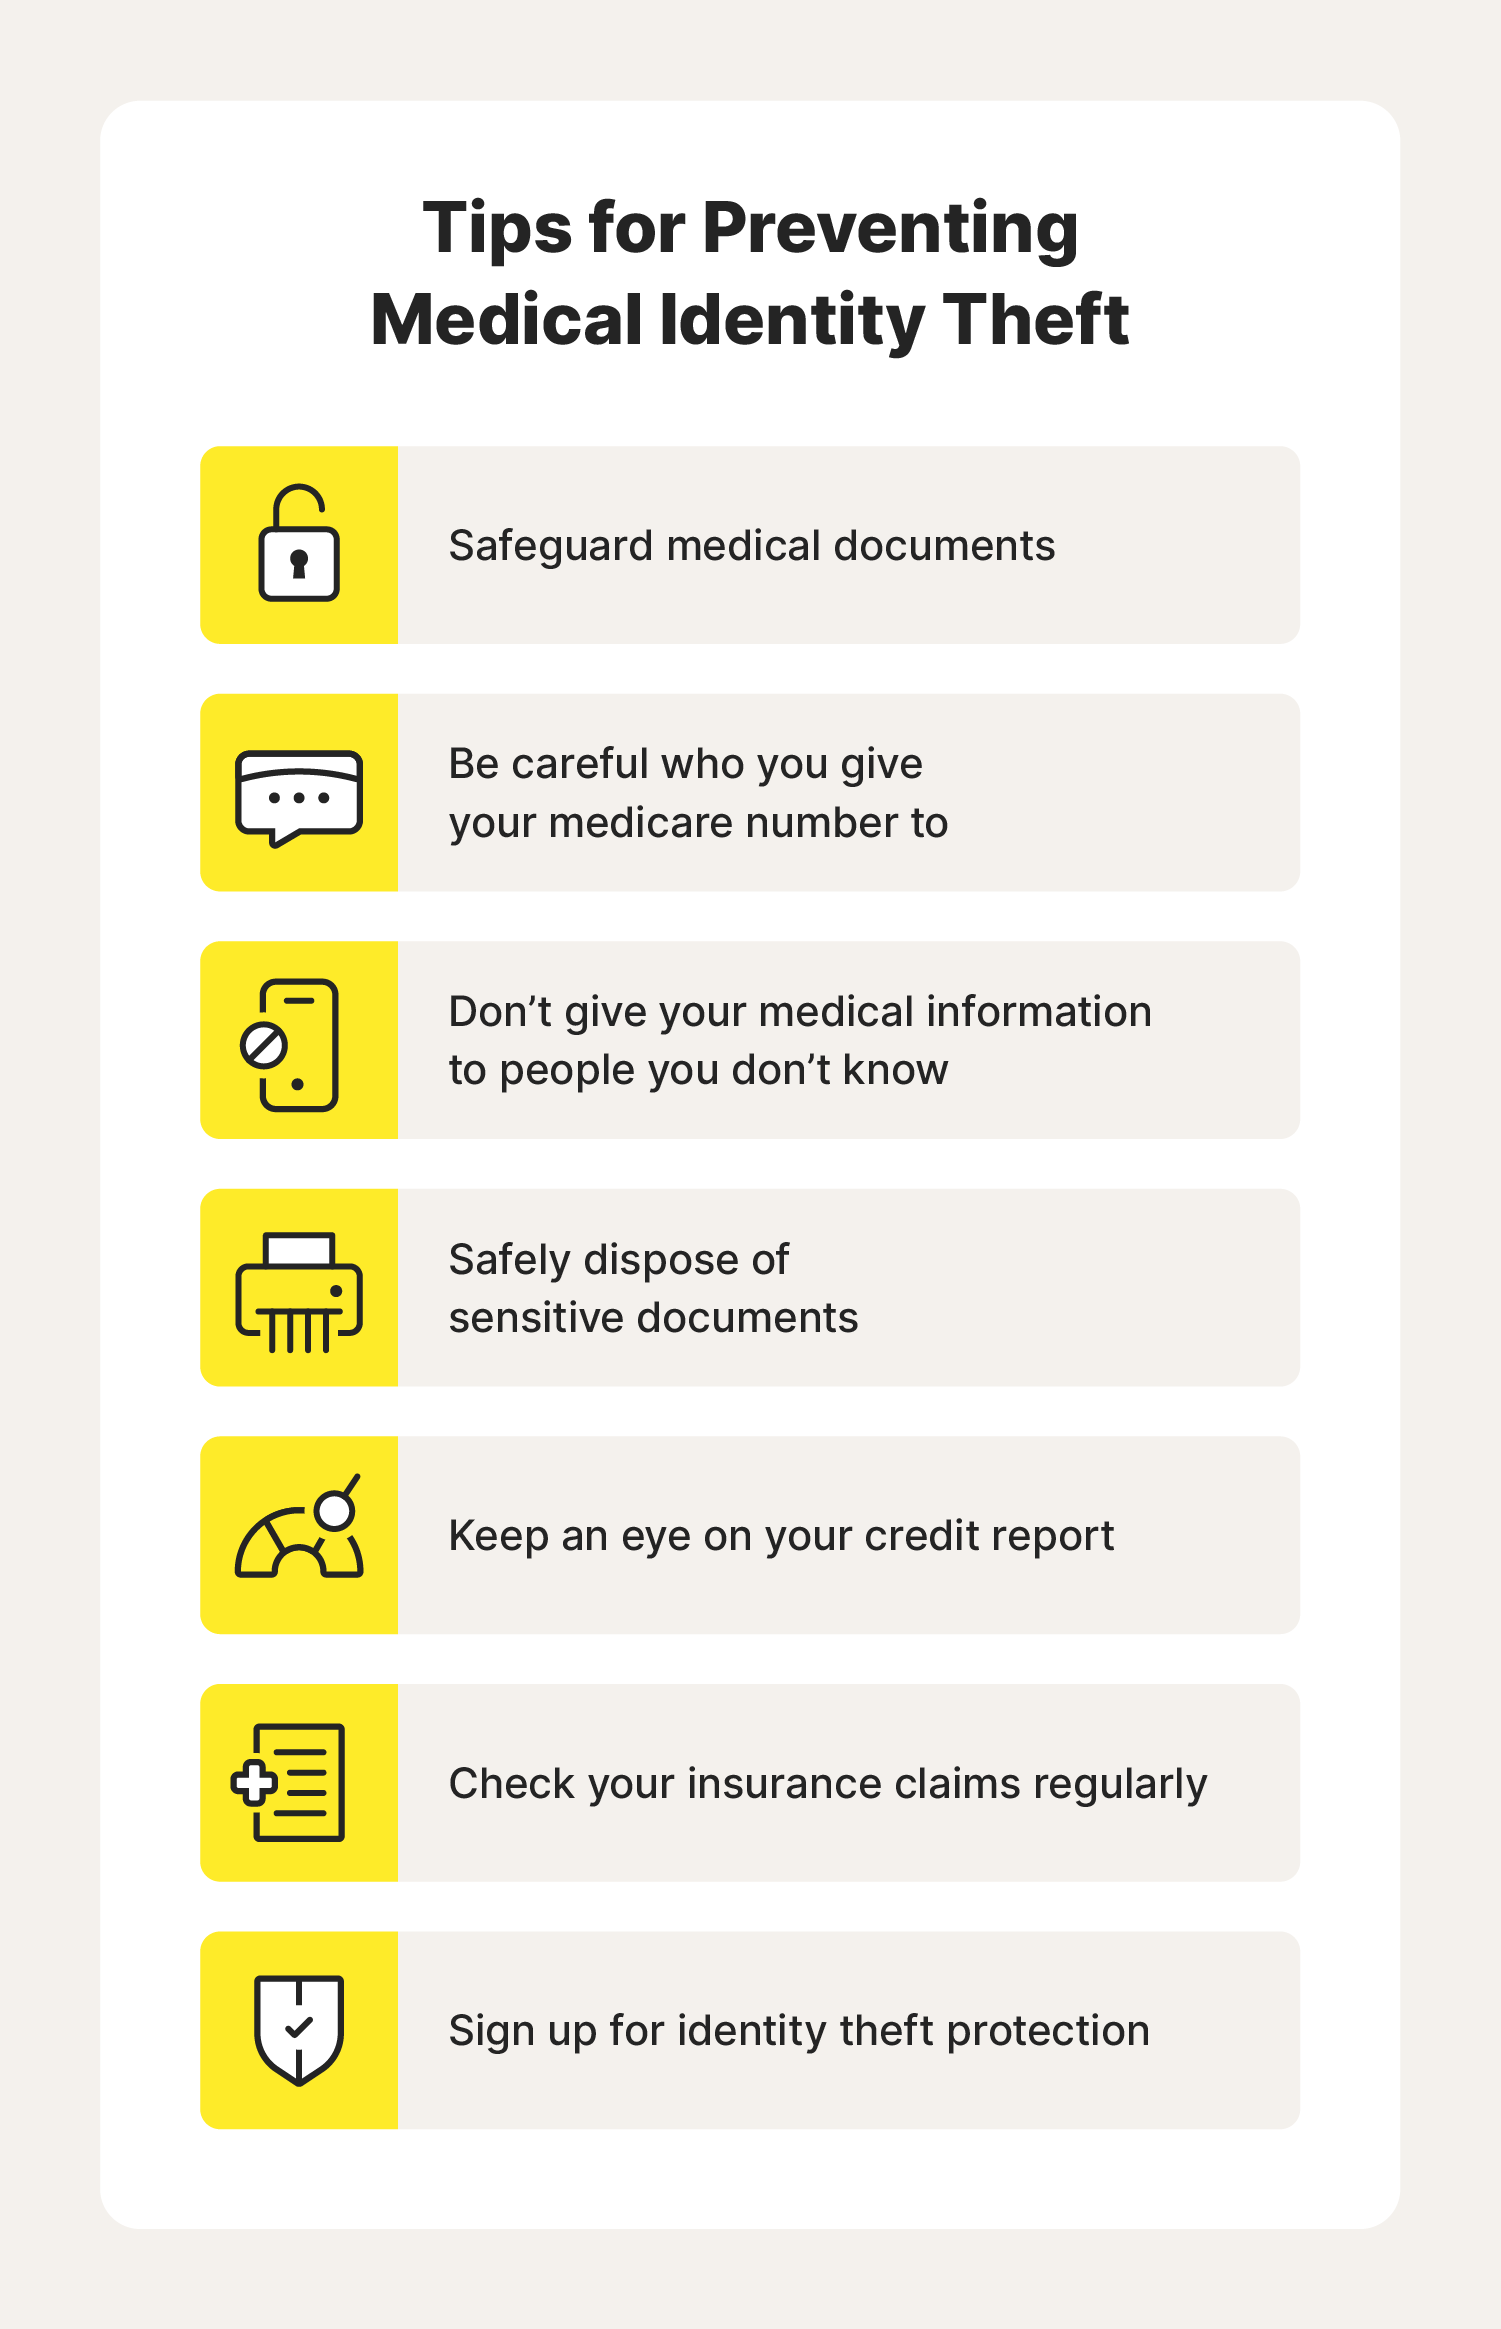 A chart showcases tips for preventing medical identity theft.